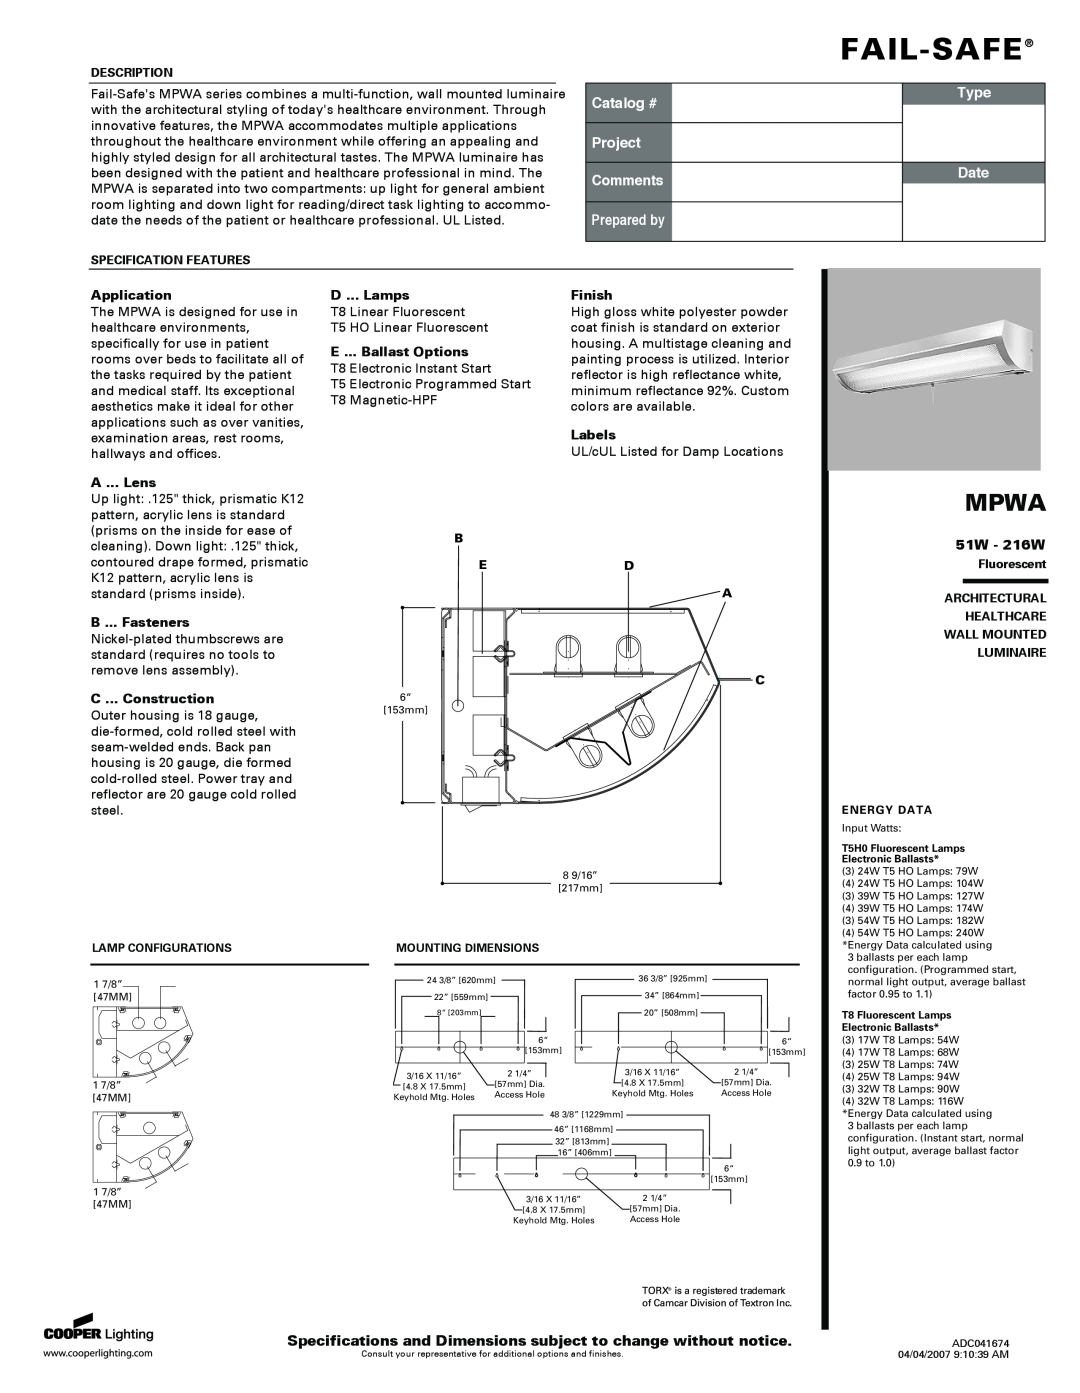 Cooper Lighting MPWA specifications 51W - 216W, Application, A ... Lens, B ... Fasteners, C ... Construction, D ... Lamps 